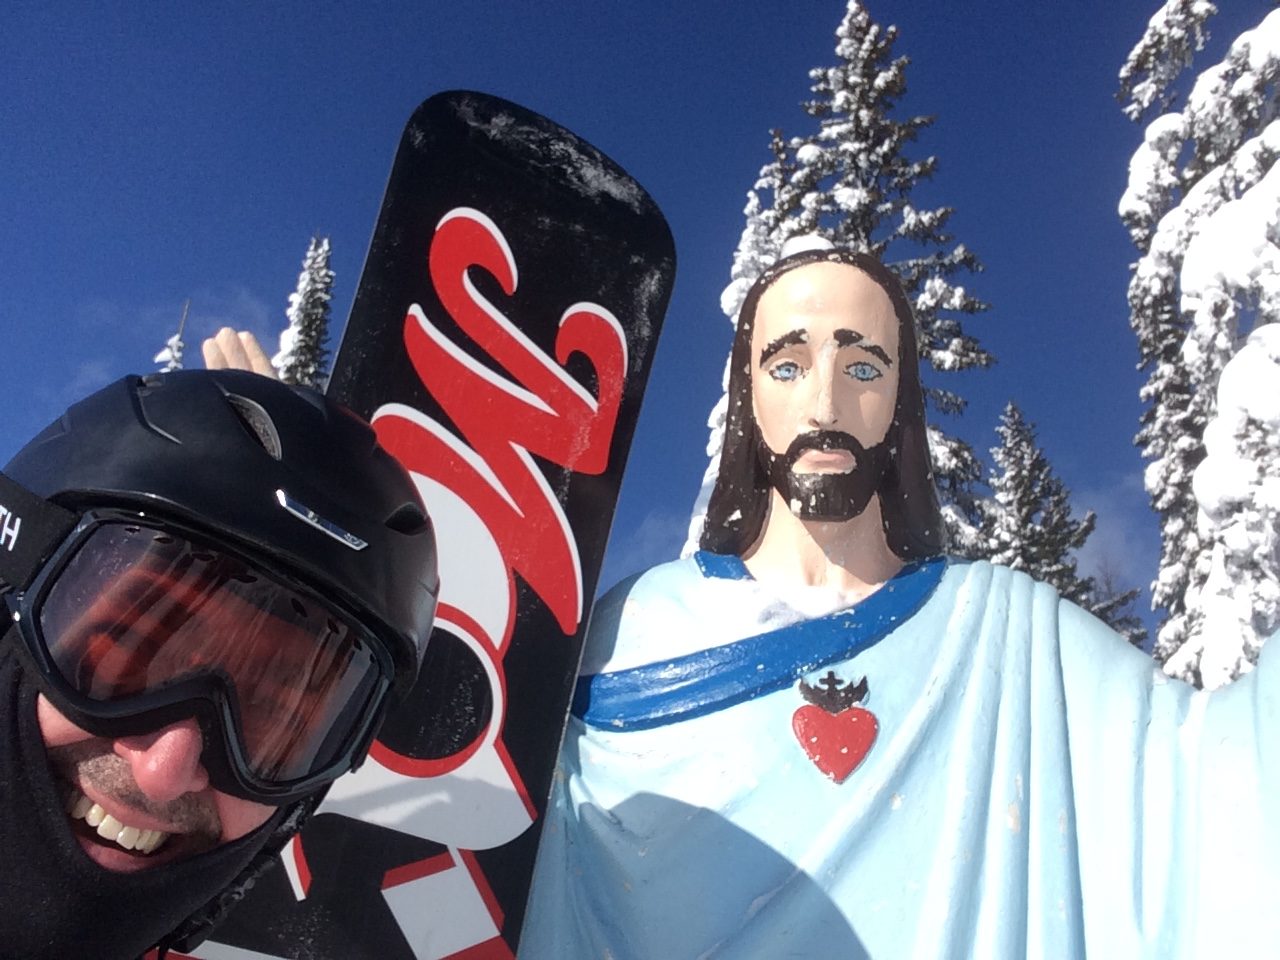 Snow Jesus at the top of Big Mountain in Whitefish, MT